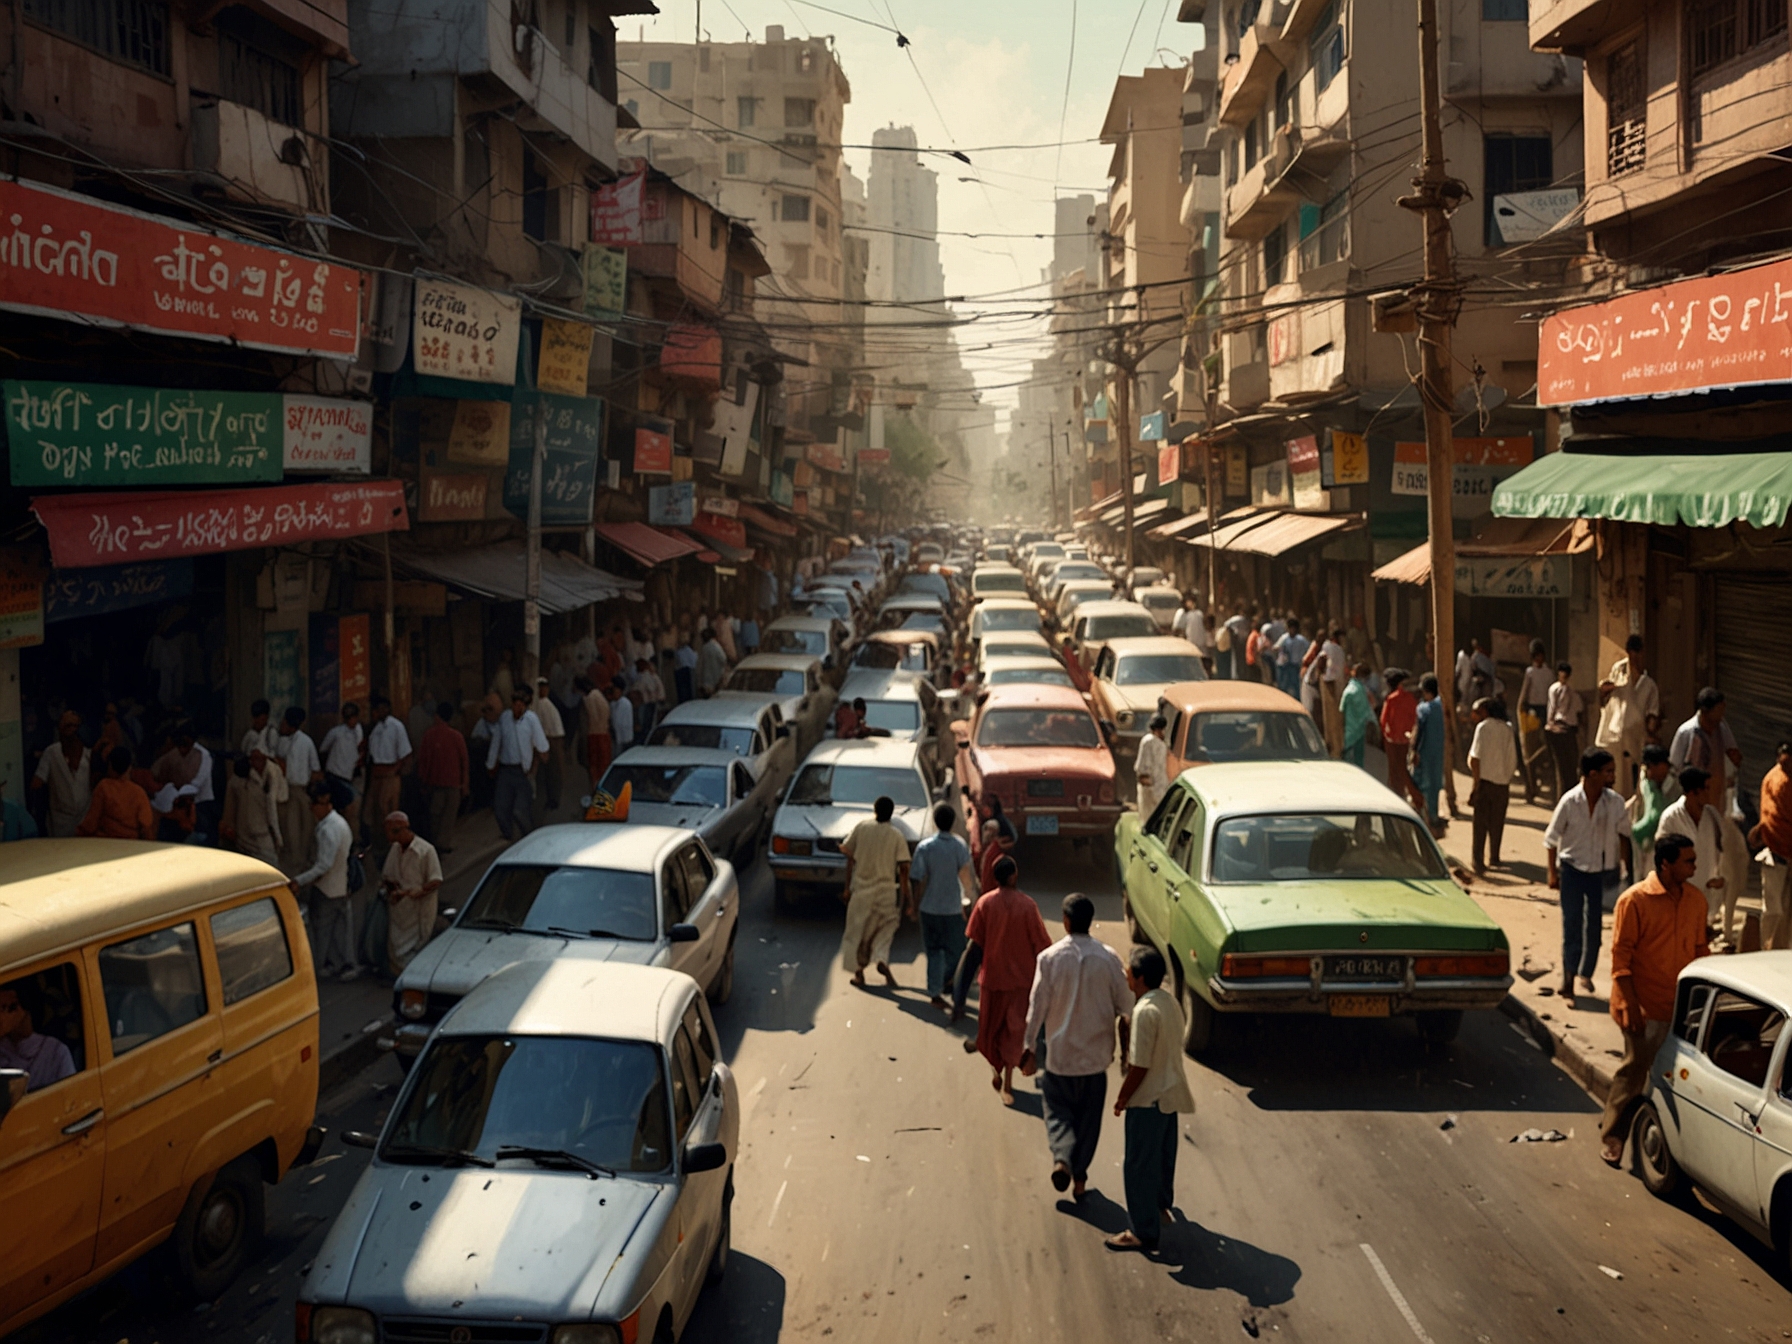 A bustling yet chaotic Indian street illustrates the pressing need for improved infrastructure, including better roads, reliable electricity, and efficient services to support economic activities.